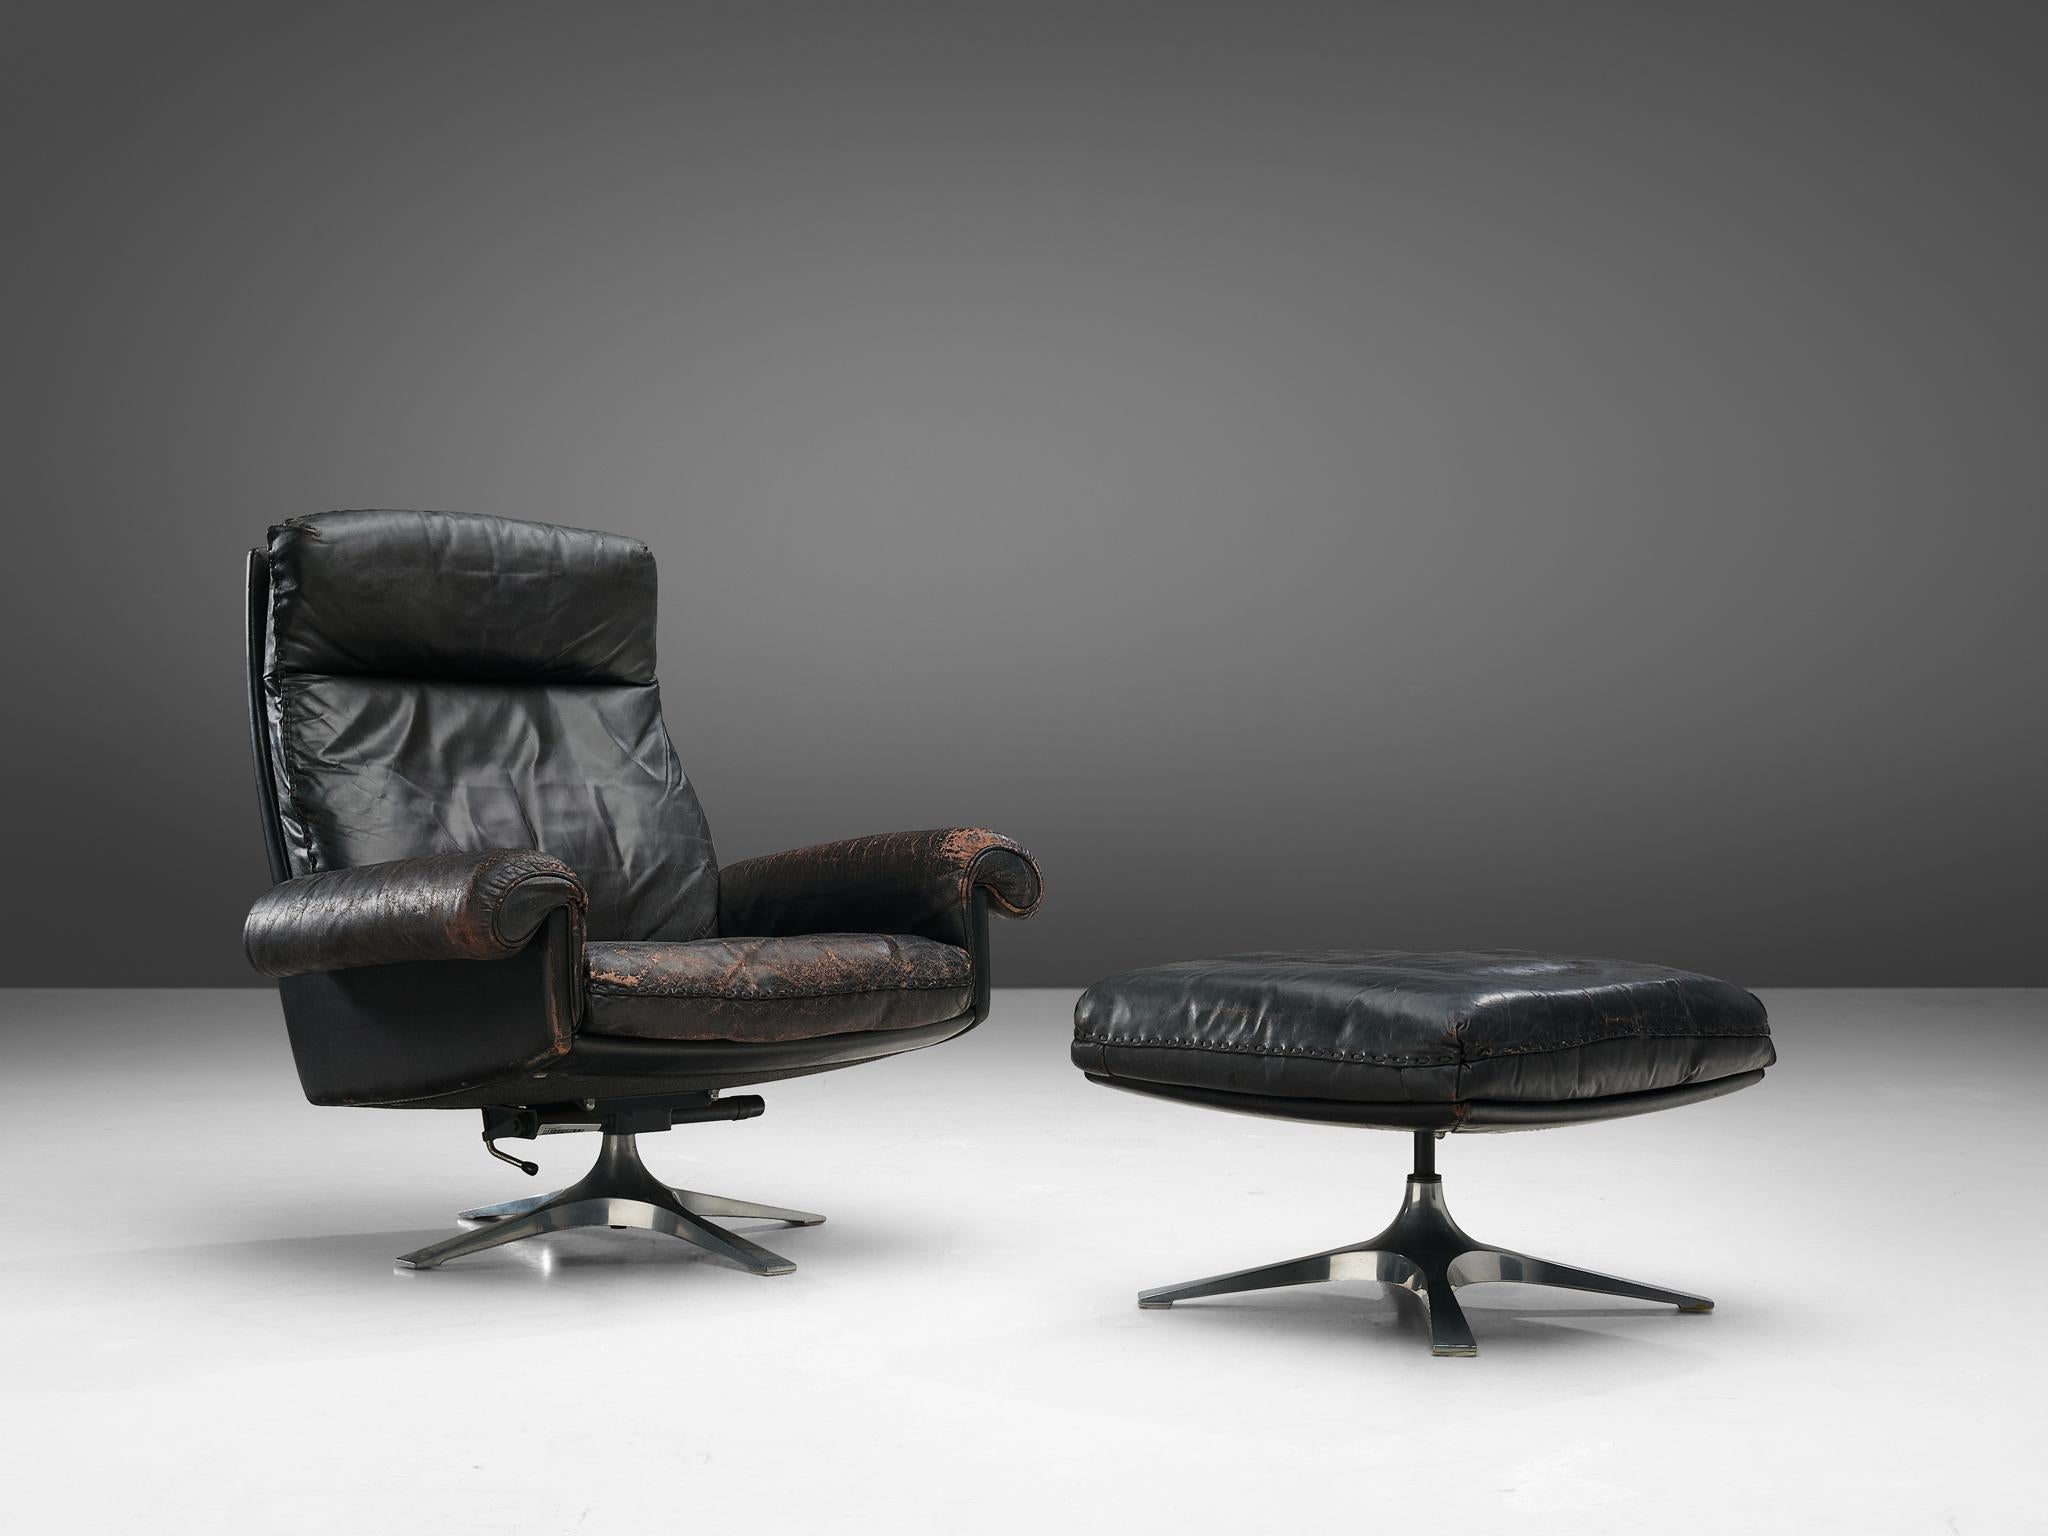 De Sede, lounge chair model 'DS31' with ottoman, leather, metal, Switzerland, 1970s

Highly comfortable 'DS31' swivel chair with a high back and ottoman in black leather by DeSede. The design is simplistic, yet very modern. The tilted seat is wide